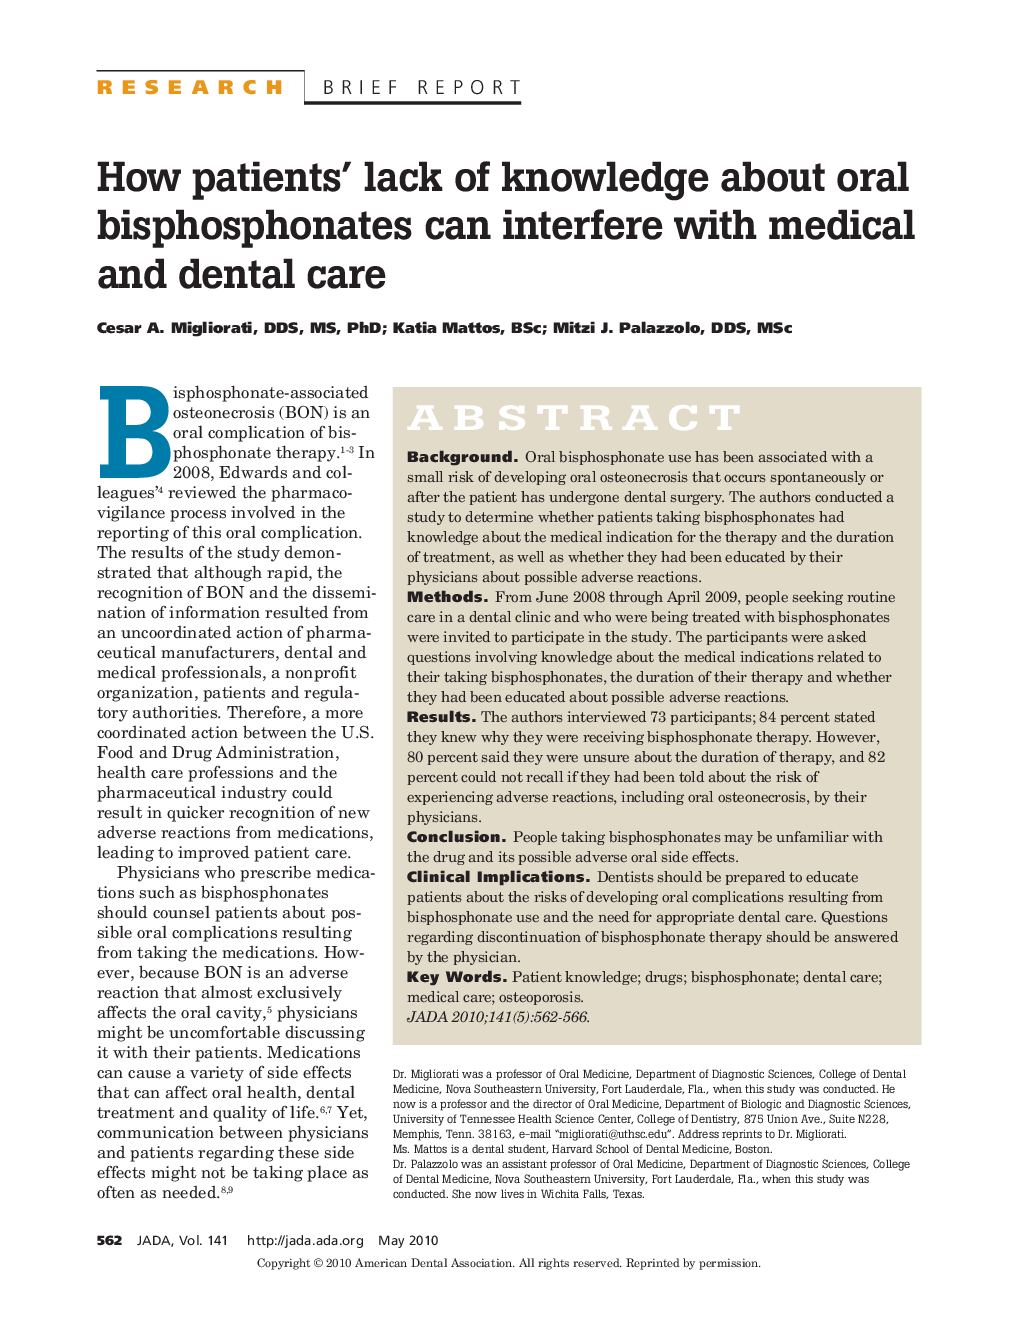 How Patients' Lack of Knowledge About Oral Bisphosphonates Can Interfere With Medical and Dental Care